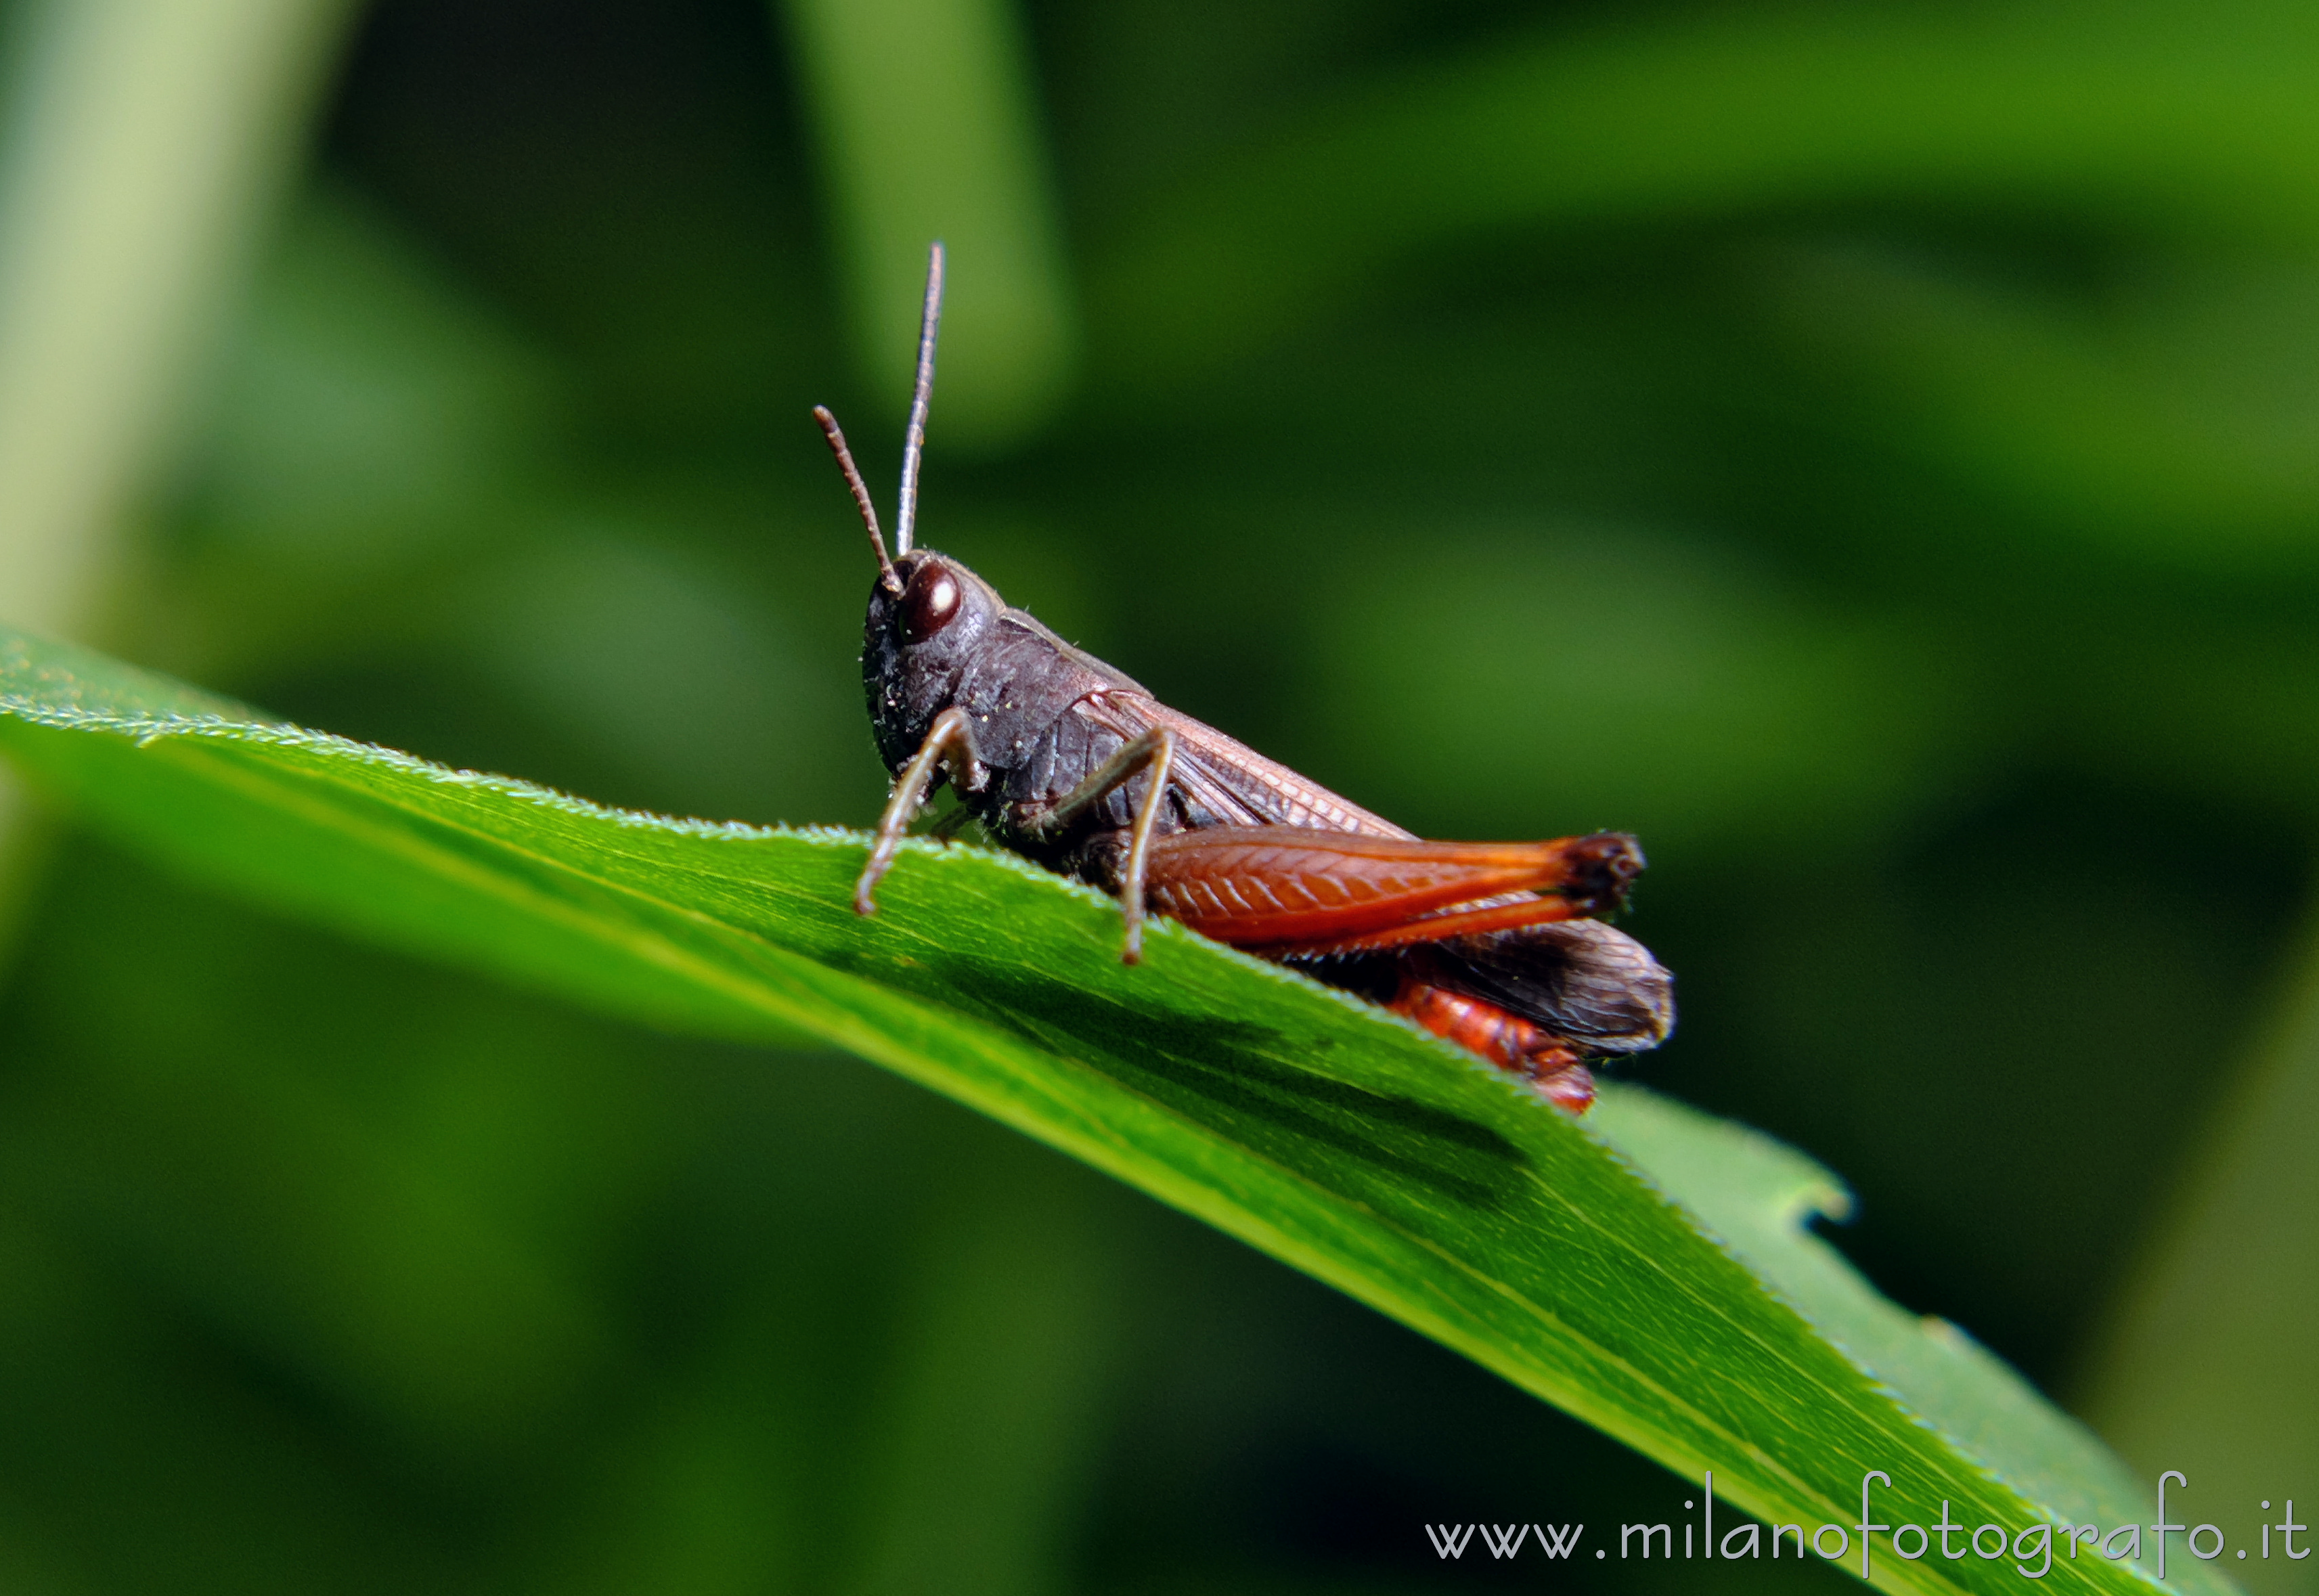 Cadrezzate (Varese Italy): Male Mocestus rufipes - Cadrezzate (Varese Italy)